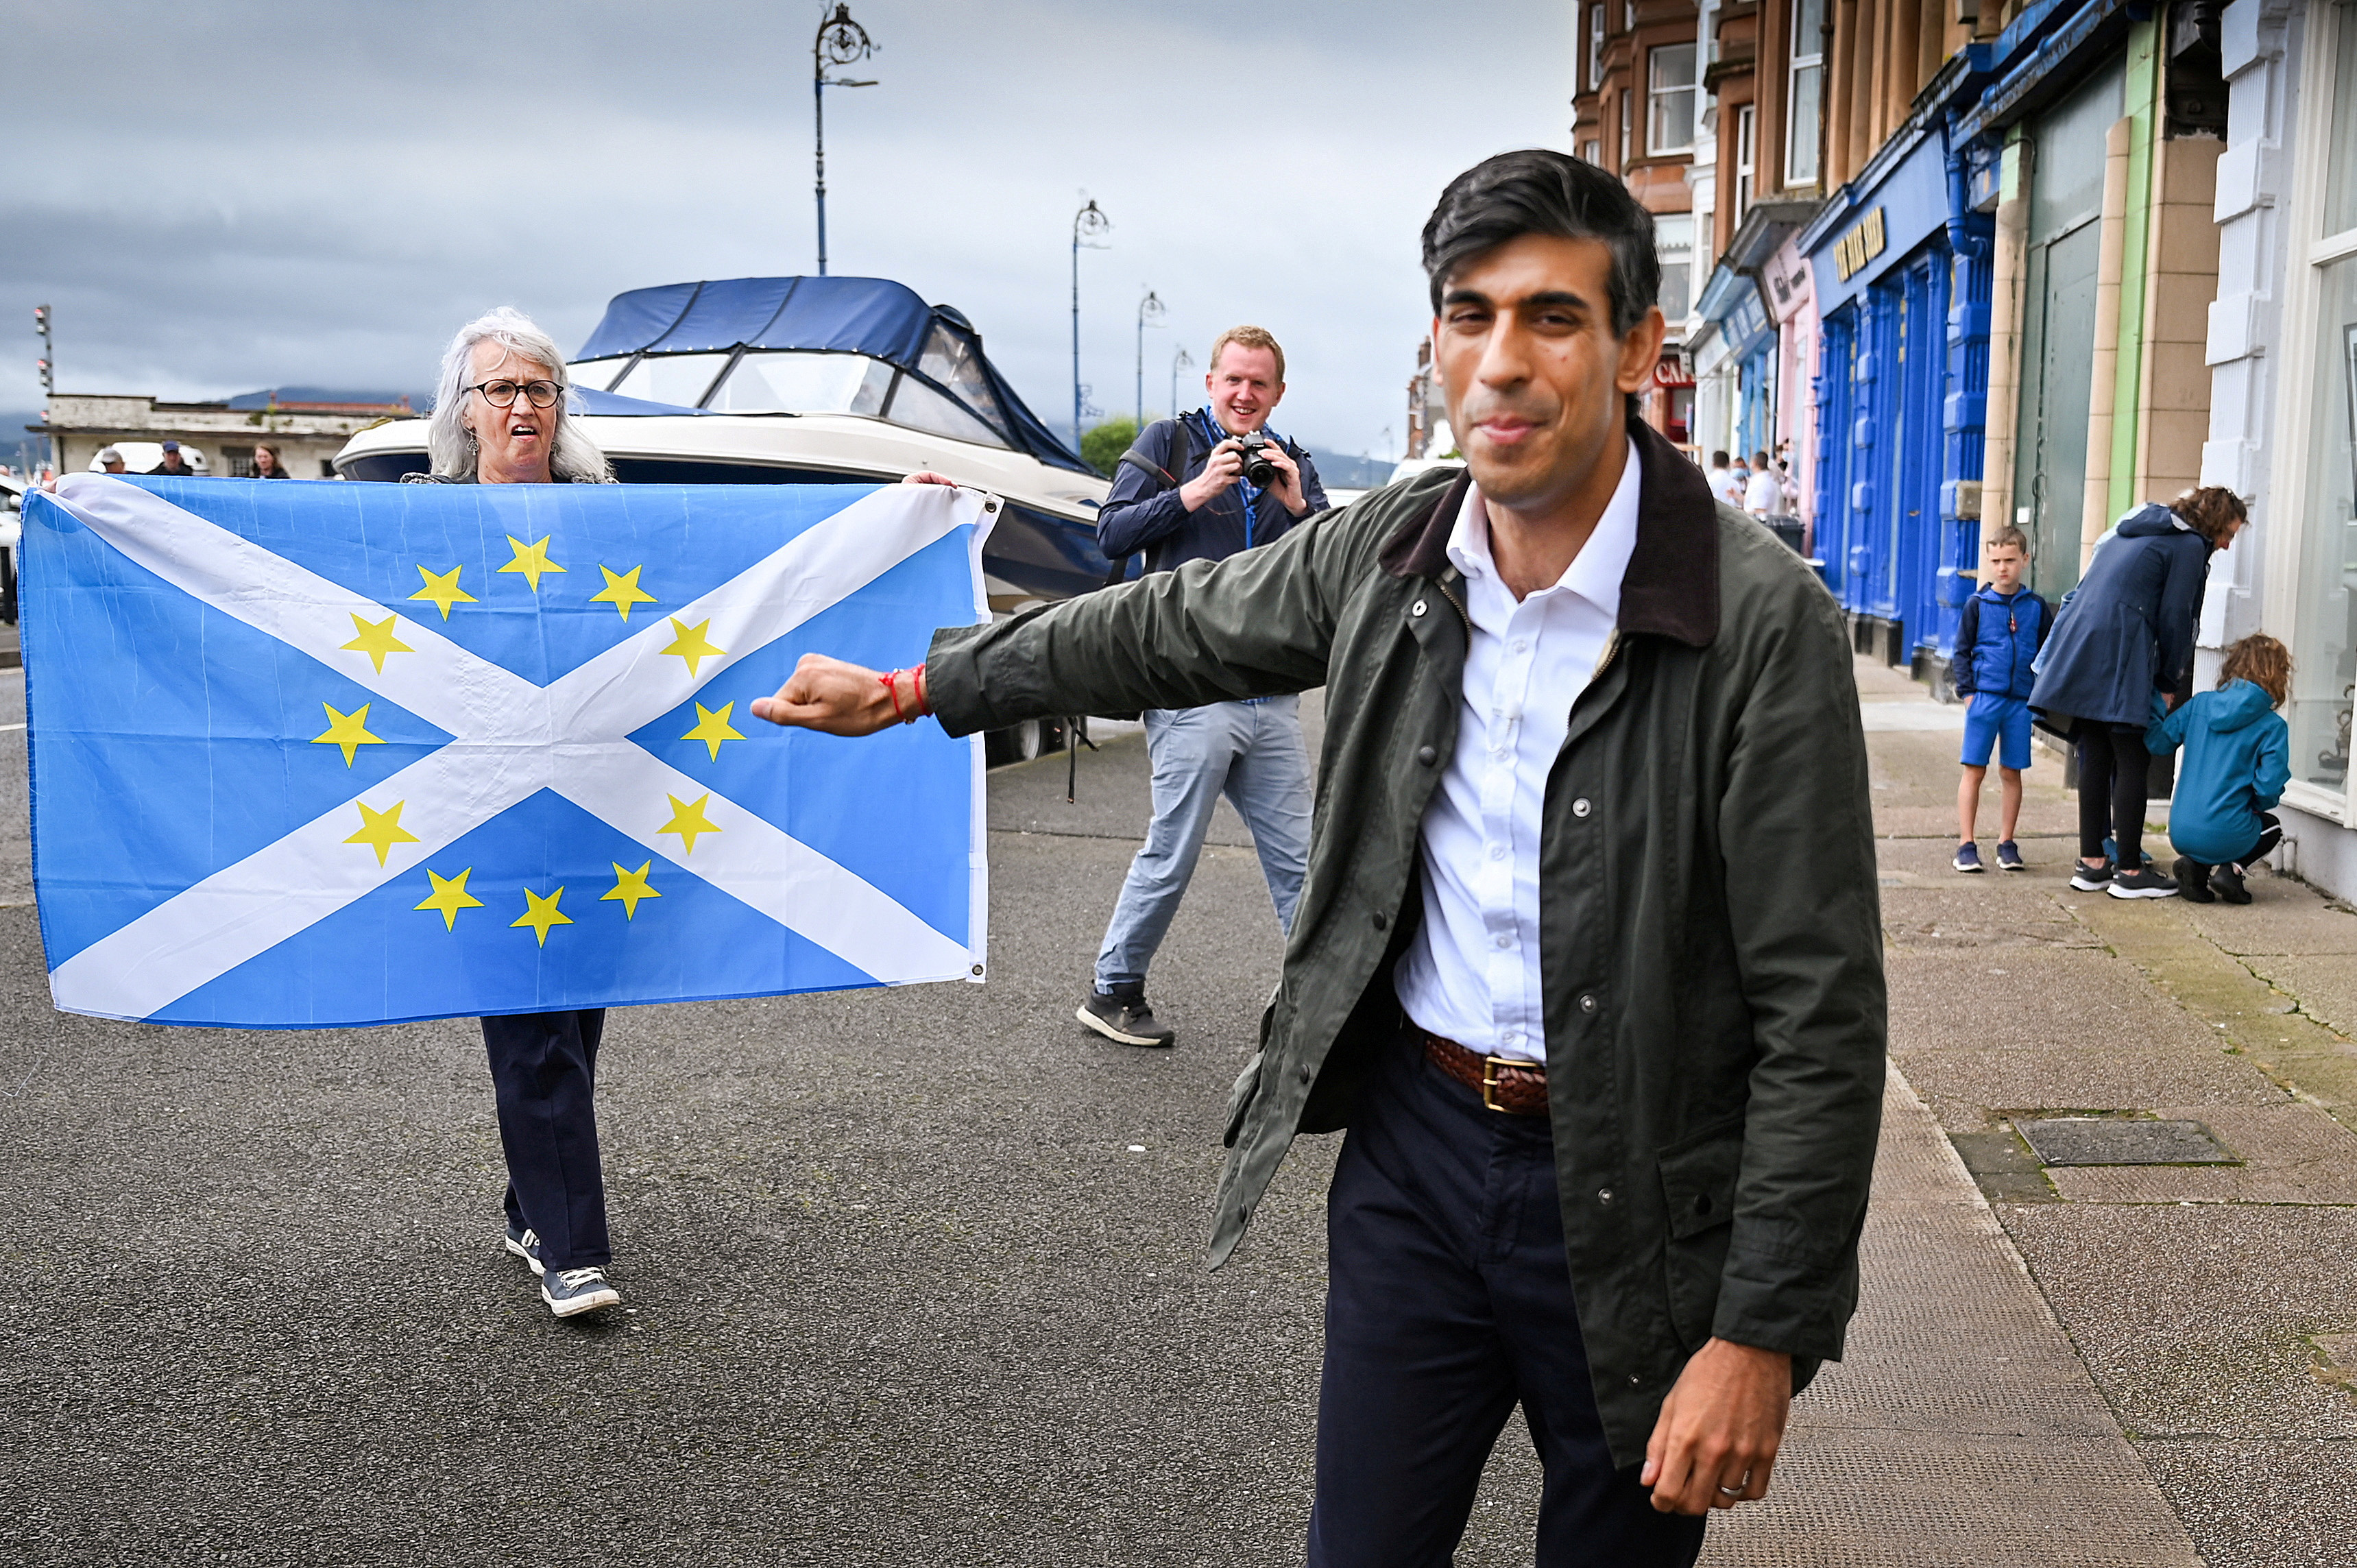 Nationalist demonstrators welcome Britain's Chancellor of the Exchequer Rishi Sunak in Rothesay